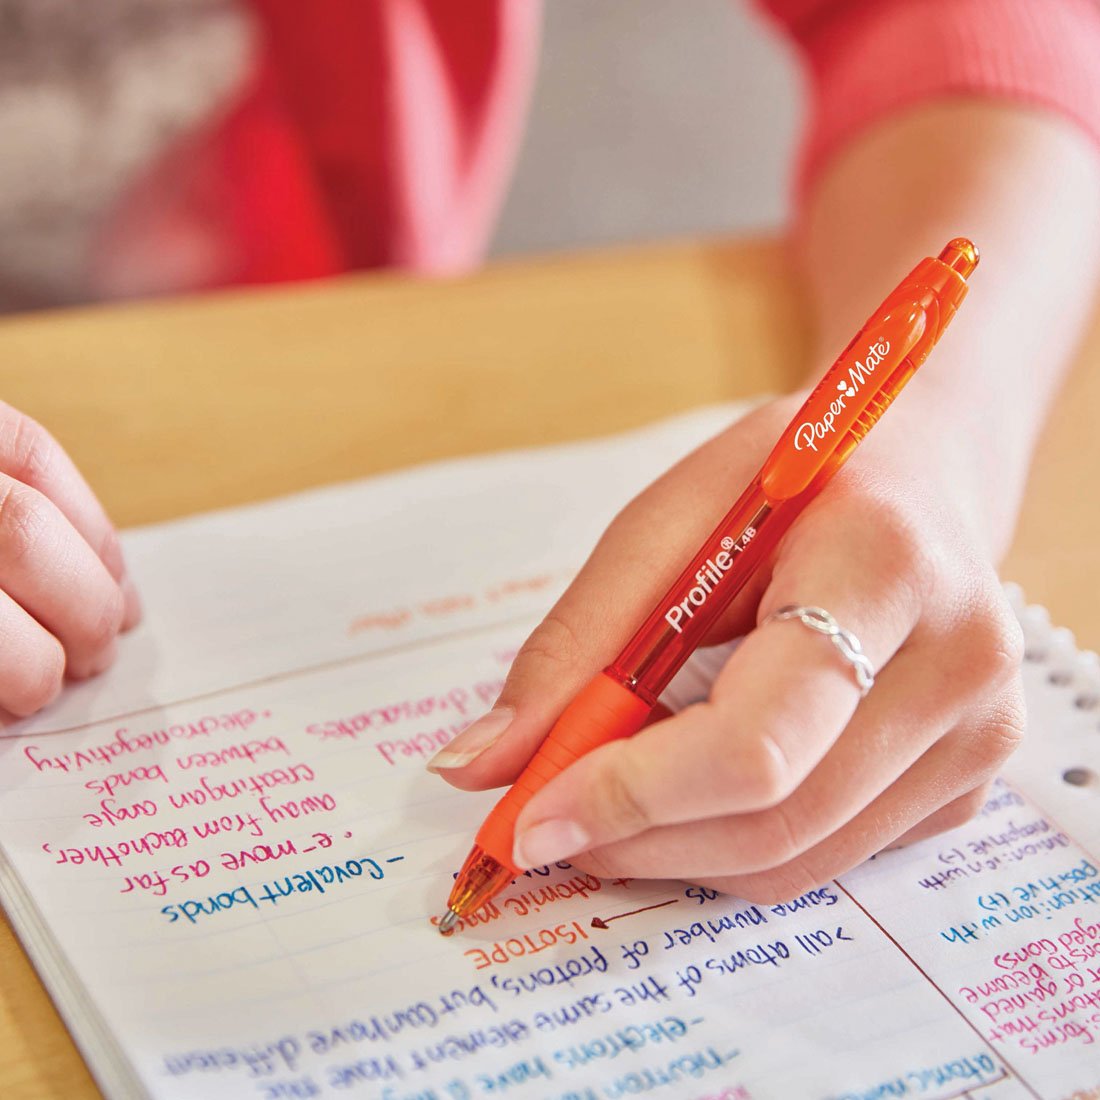 What is the benefit of writing notes with different coloured pens